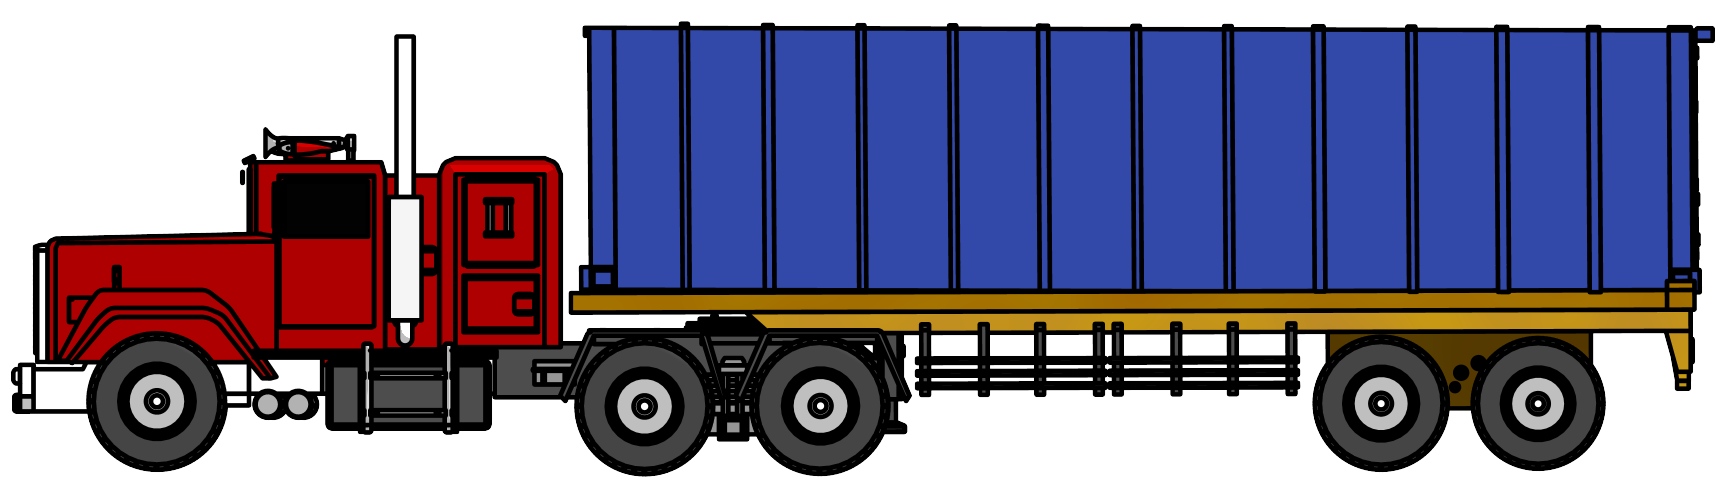 Industrial Truck Big Truck Clipart Png Image Side View